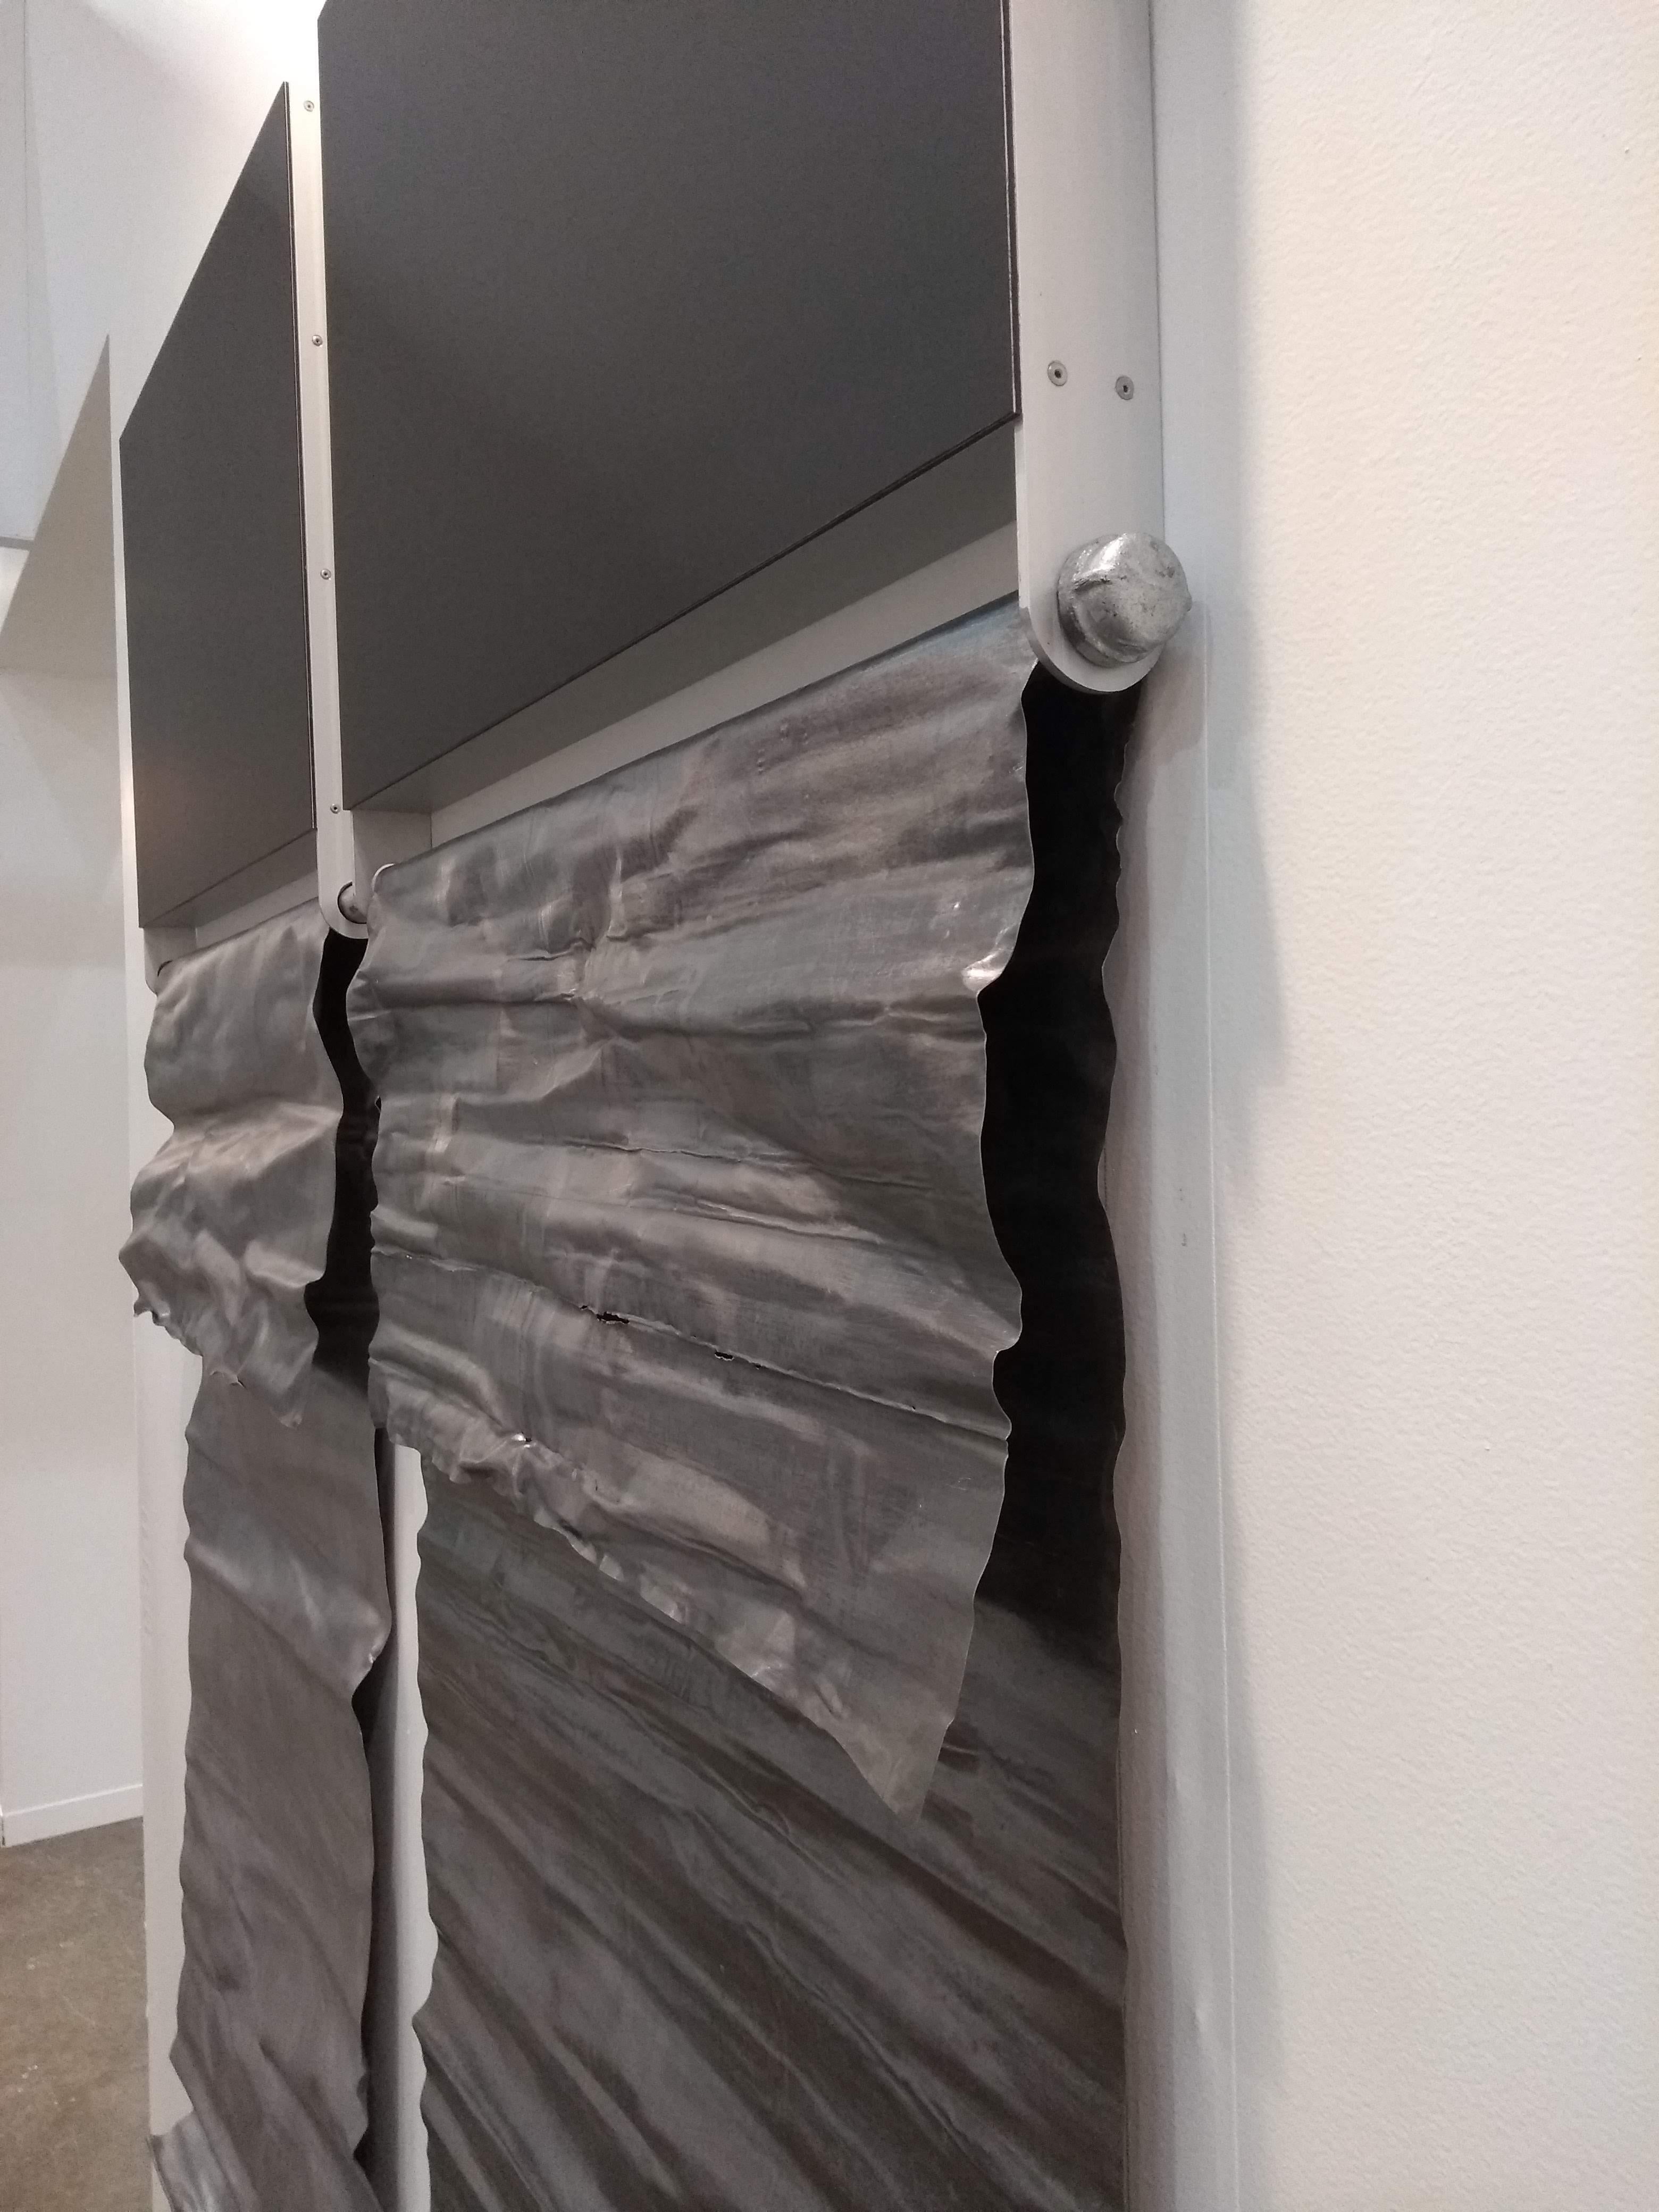 Nanotechnology Material, Lead, Galvanized Pipe 
and Caps on Aluminum
Exhibited at the International Art Fair, Zona Maco 2019 in Mexico City.
Exhibited at Mana Contemporary at Jersey City, New Jersey in 2018. 